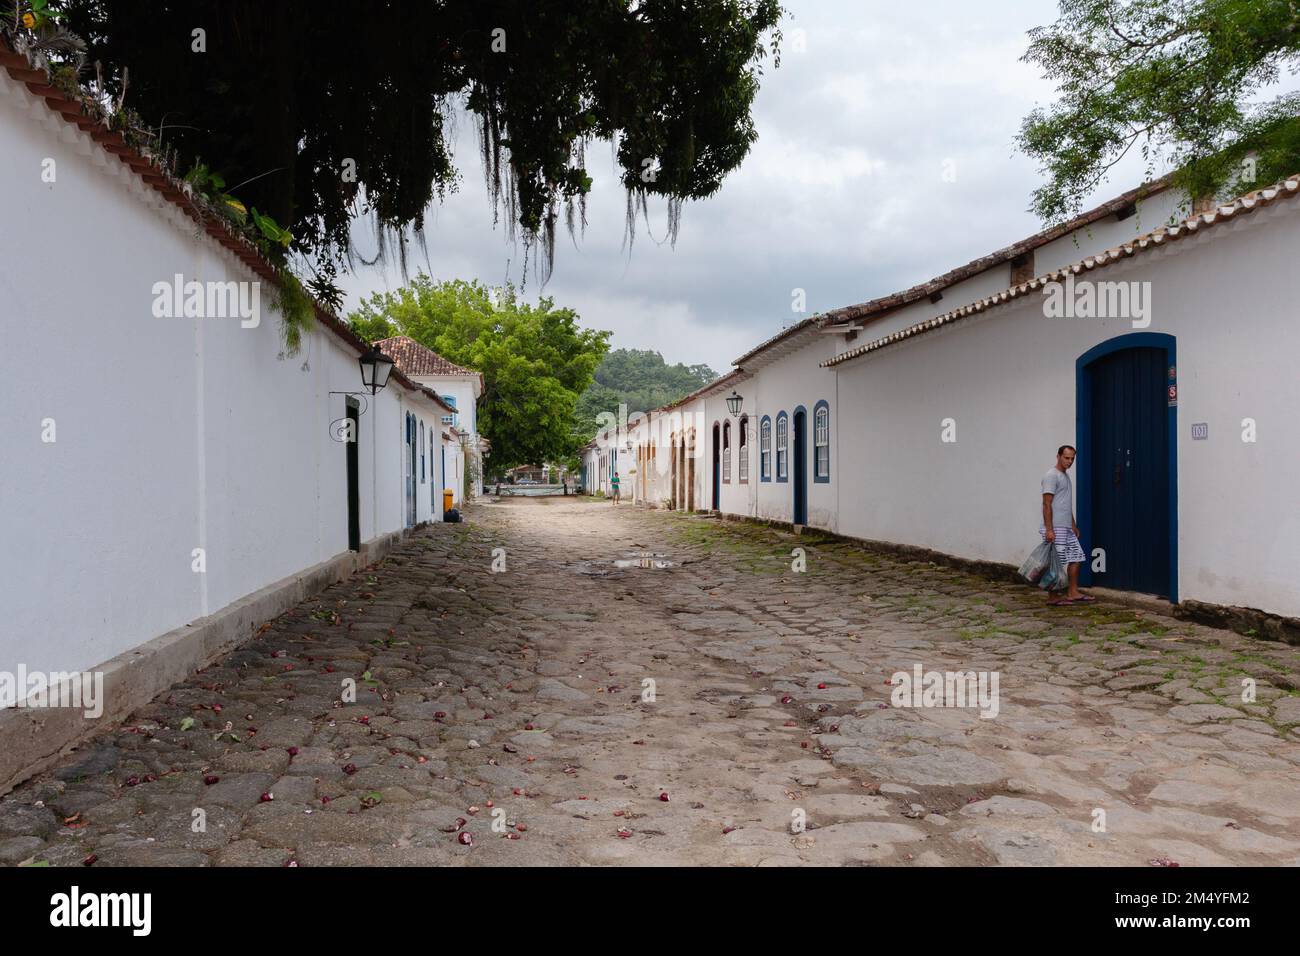 Paraty, RJ, Brazil. 27 December, 2012. A general view shows historic buildings and cobblestone paved streets in the Historic Center District of Paraty, Rio de Janeiro, Brazil. The historic center of Paraty, were inscribed on UNESCO World Heritage List in 2019 under the title 'Paraty and Ilha Grande'. Stock Photo